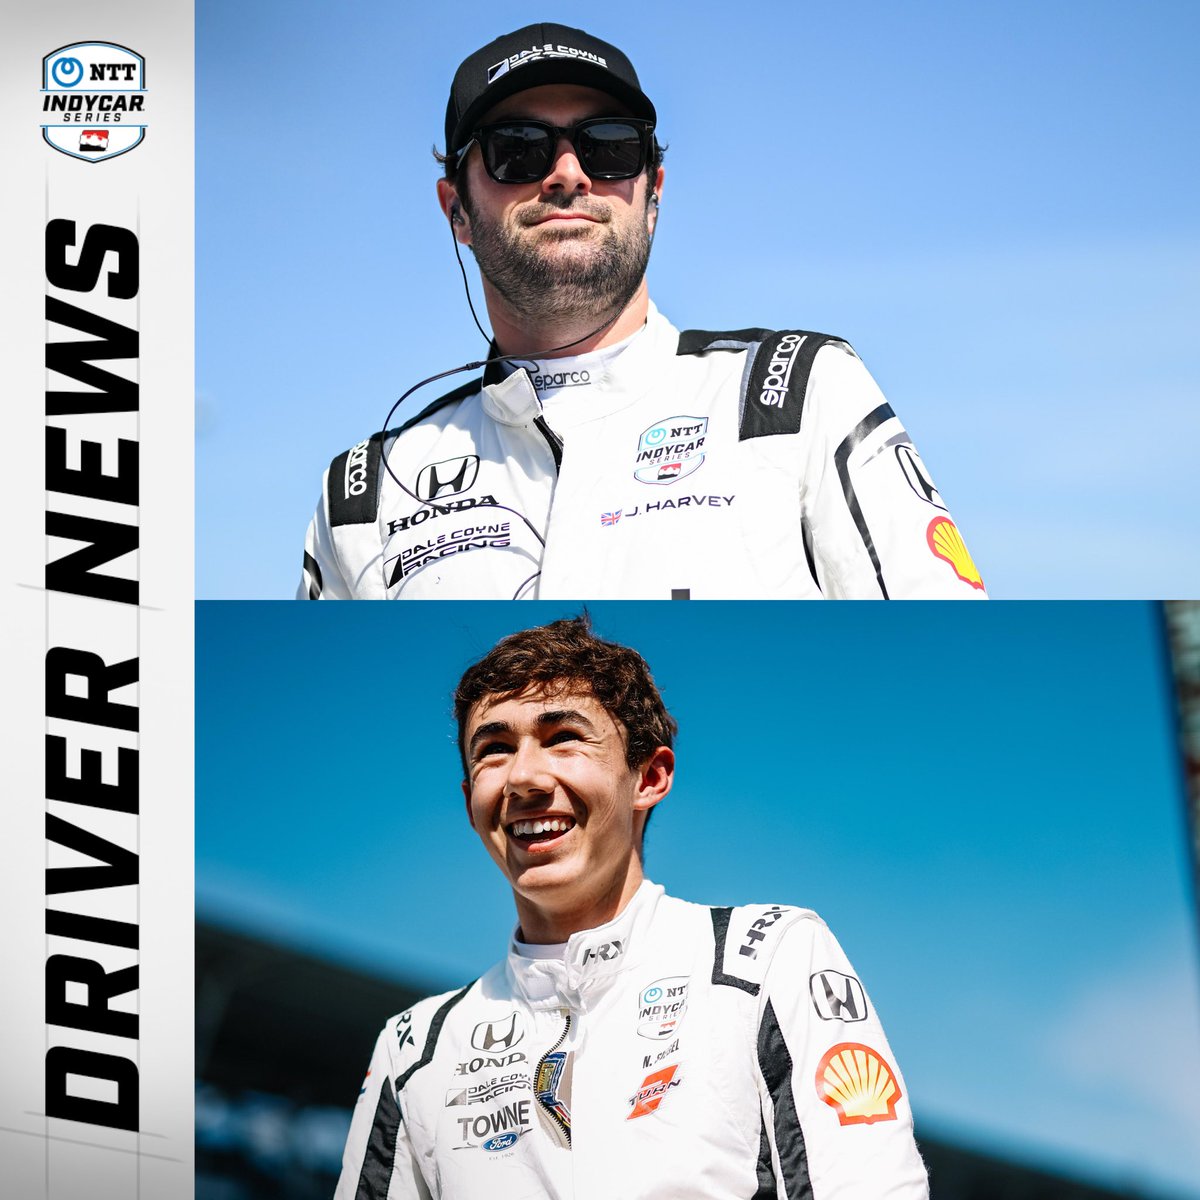 DRIVER NEWS: @jack_harvey93 is back for the @GPLongBeach.   Harvey will pilot the No. 18 while @nolan_siegel will pilot the No. 51 for Dale Coyne Racing on the Streets of Long Beach.   #INDYCAR // @DaleCoyneRacing